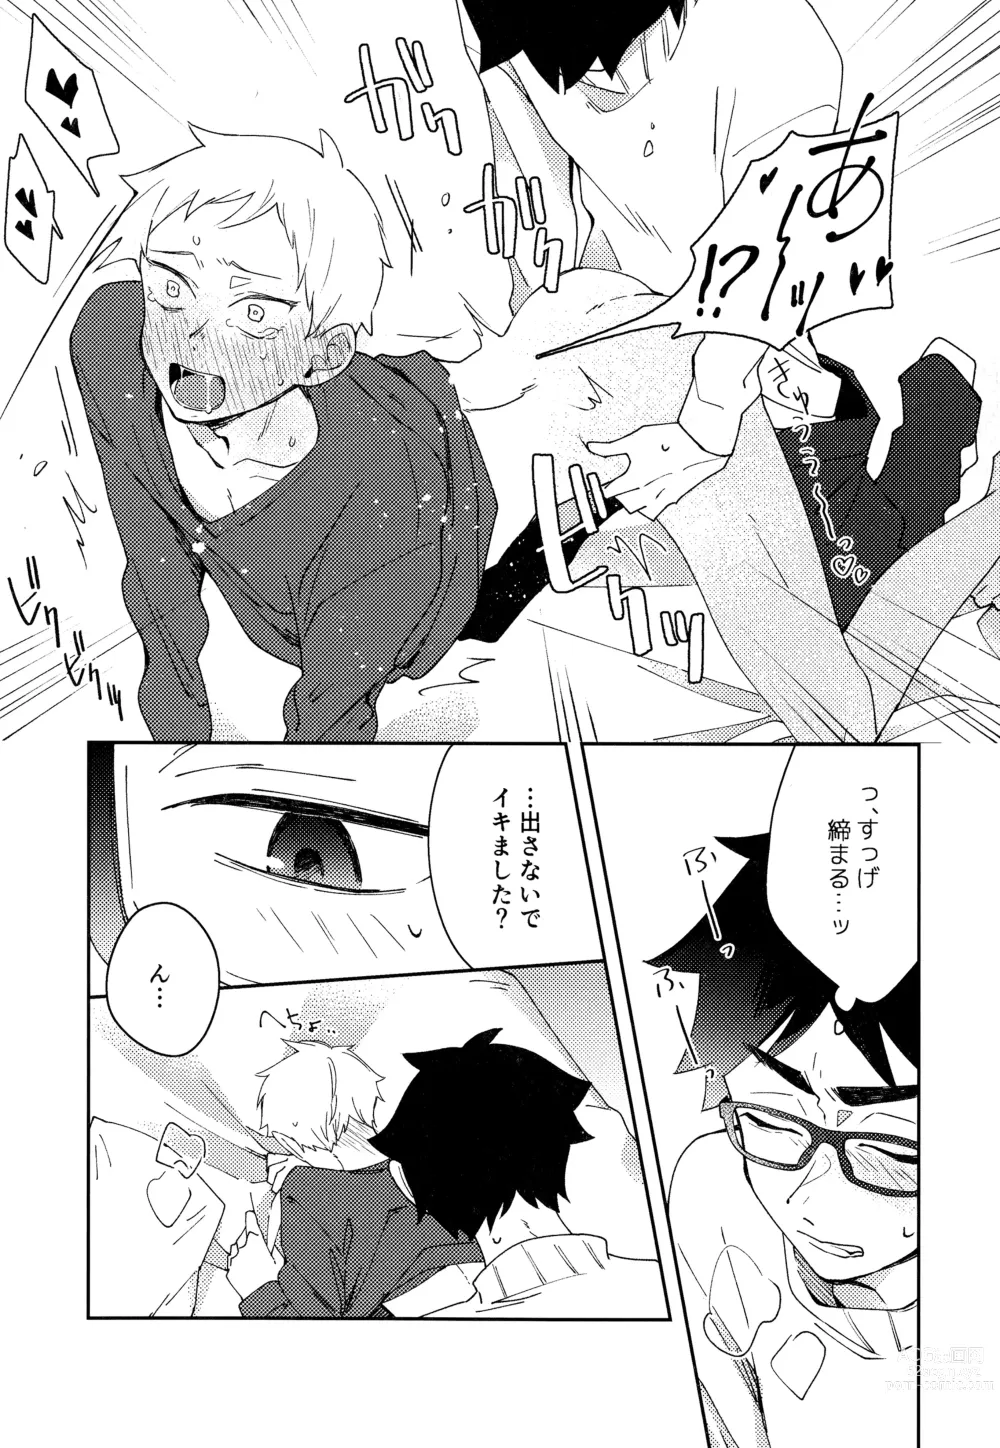 Page 131 of doujinshi Light Side Day